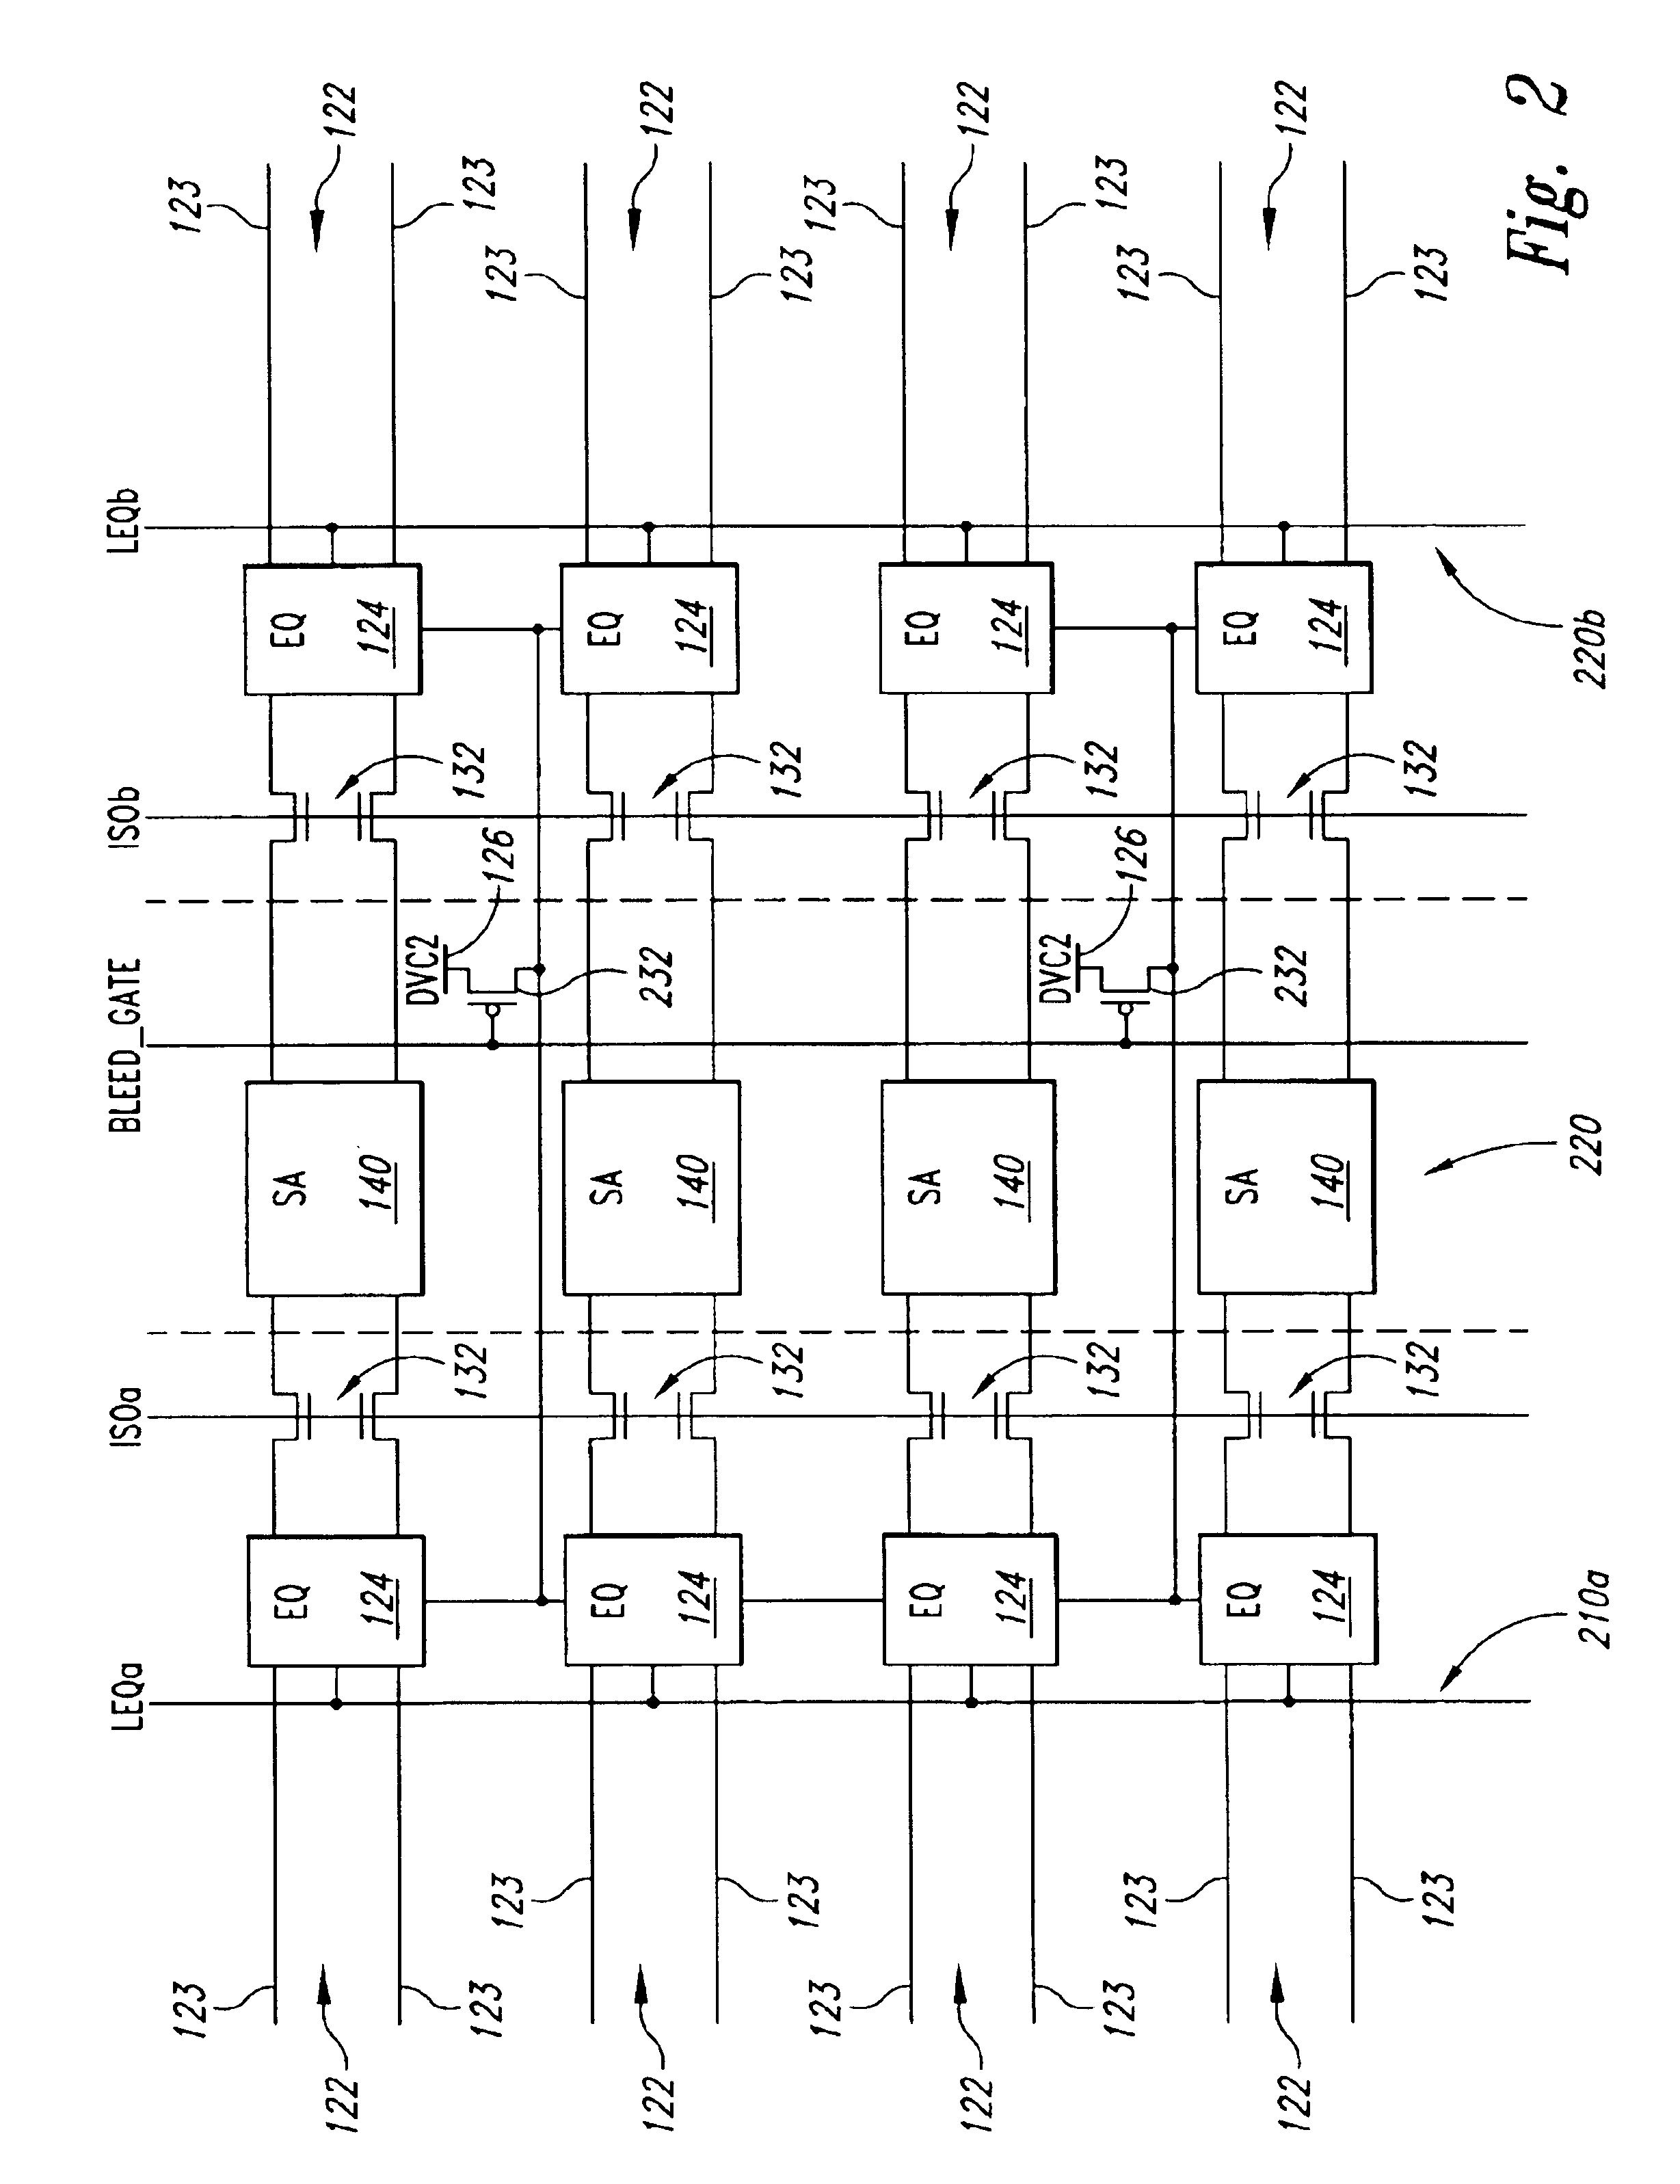 Apparatus and method for a current limiting bleeder device shared by columns of different memory arrays